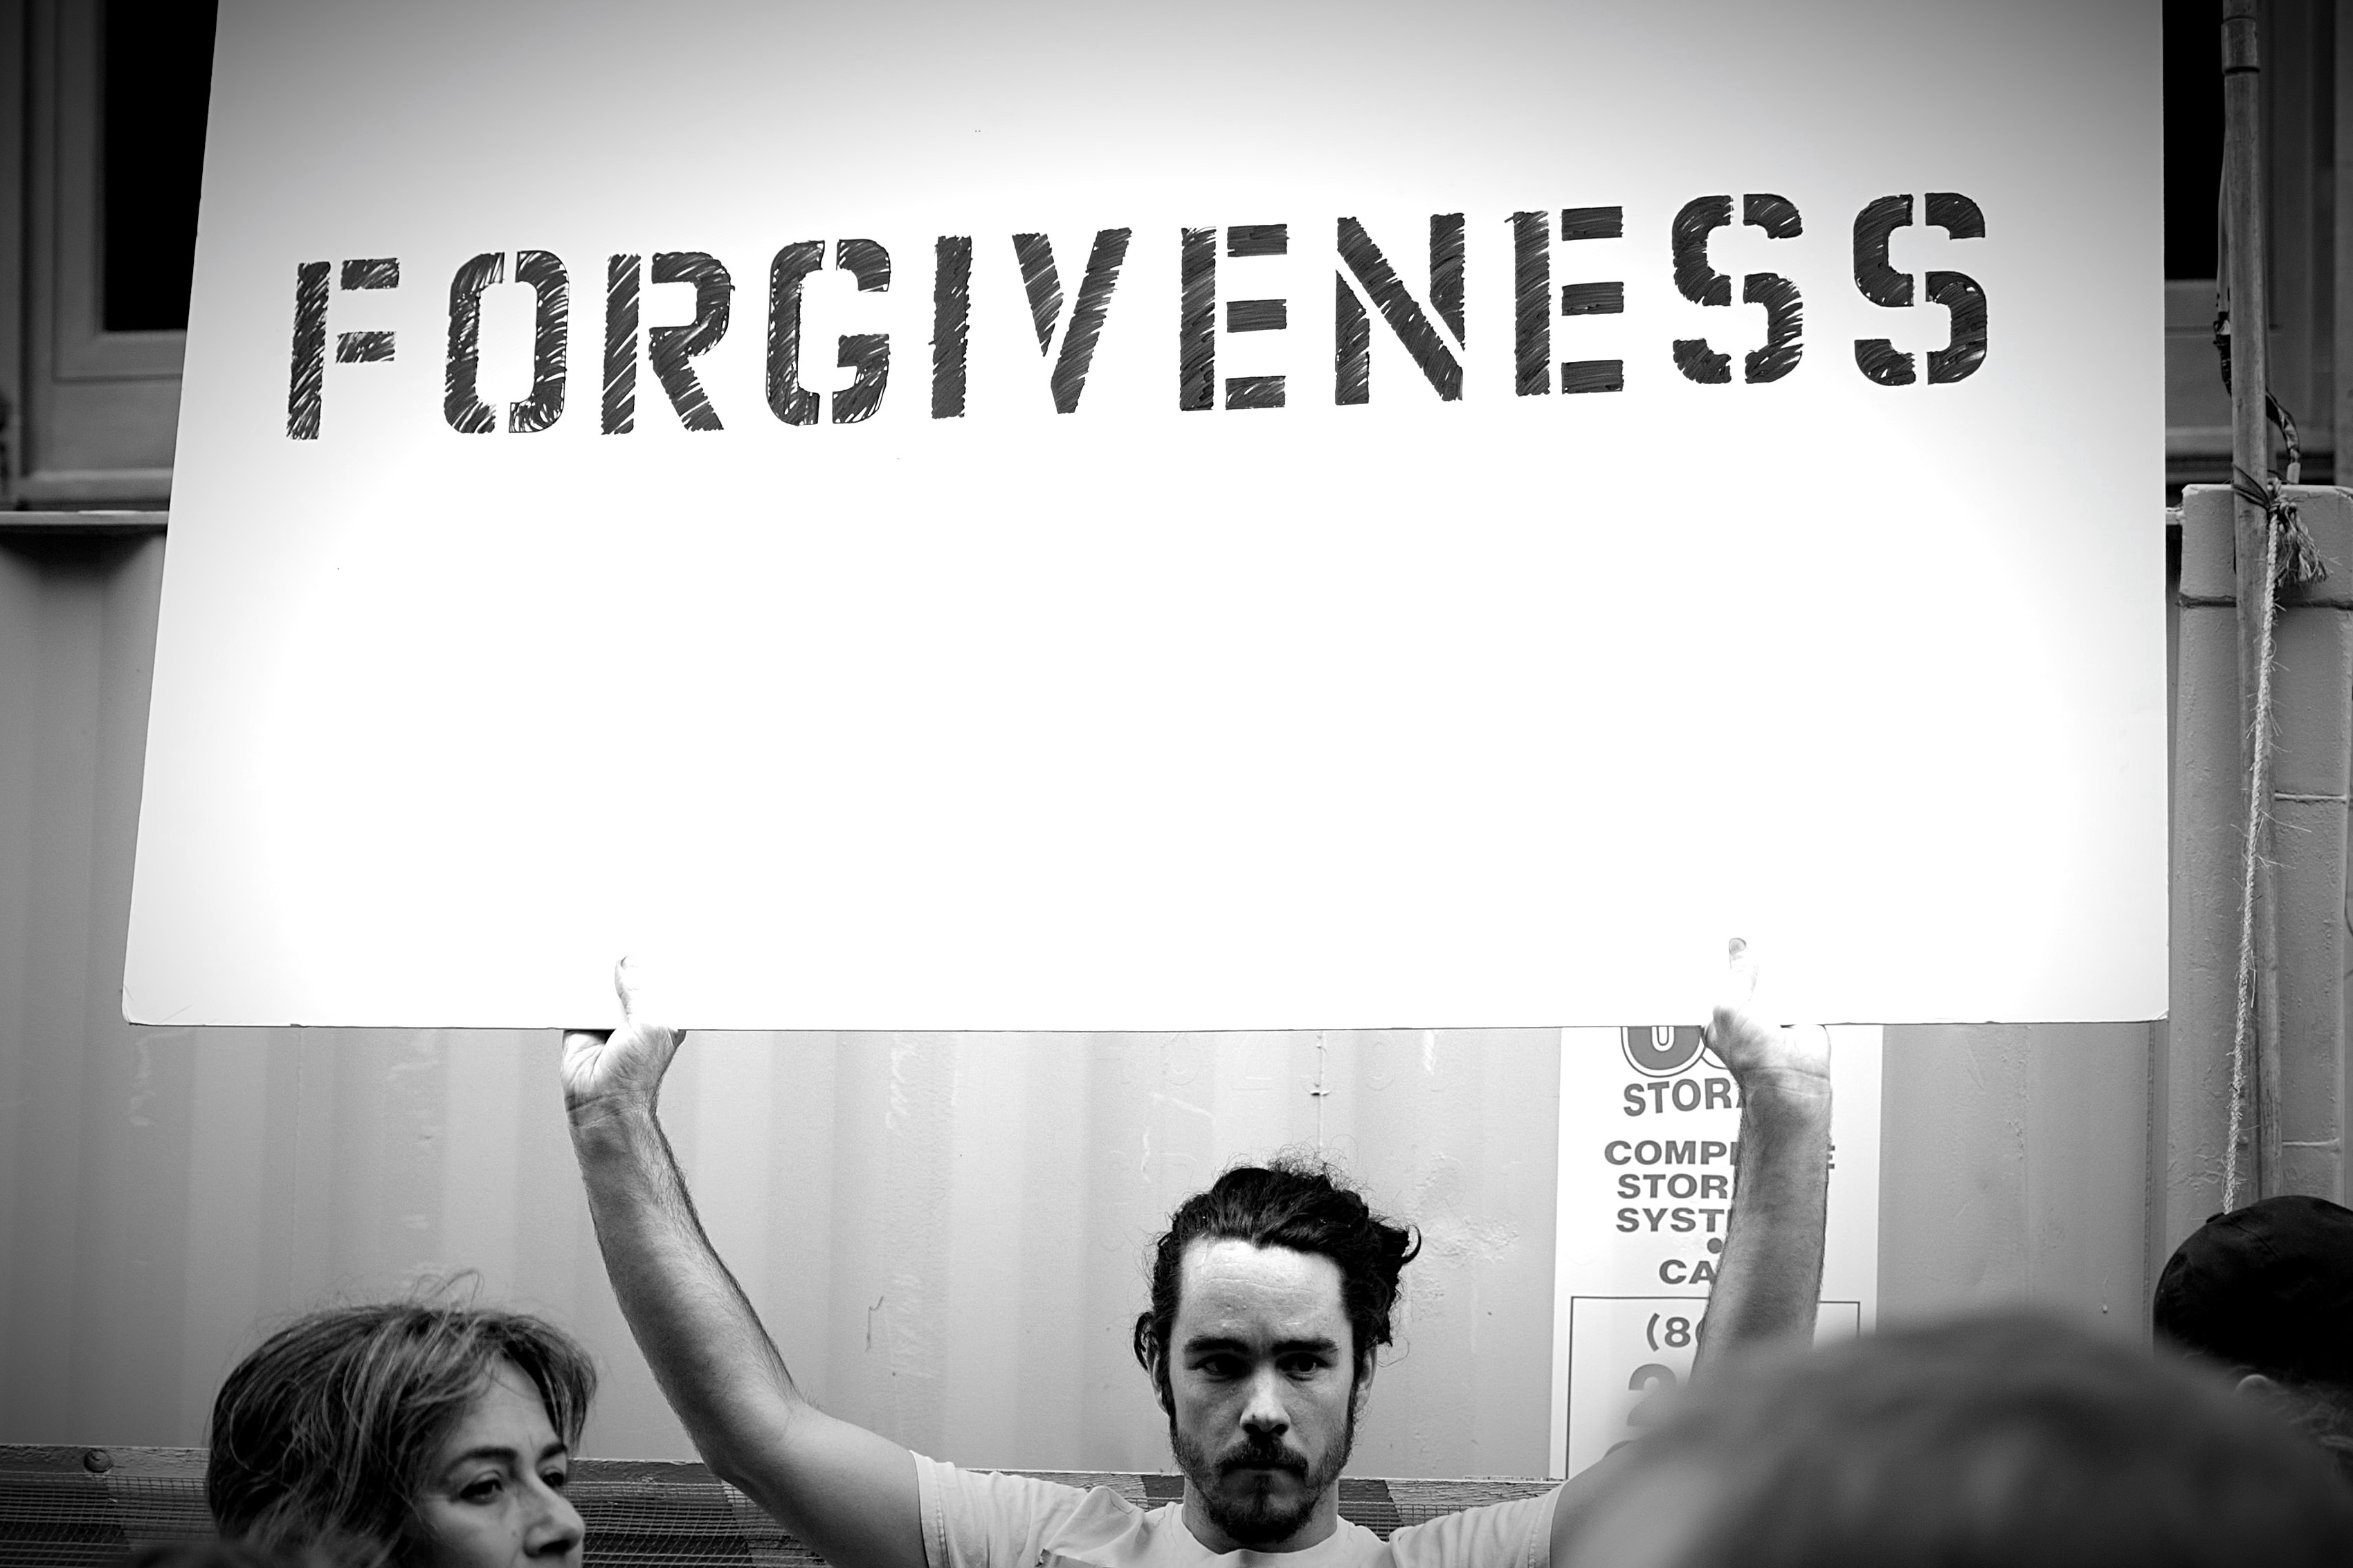 The Package of Forgiveness